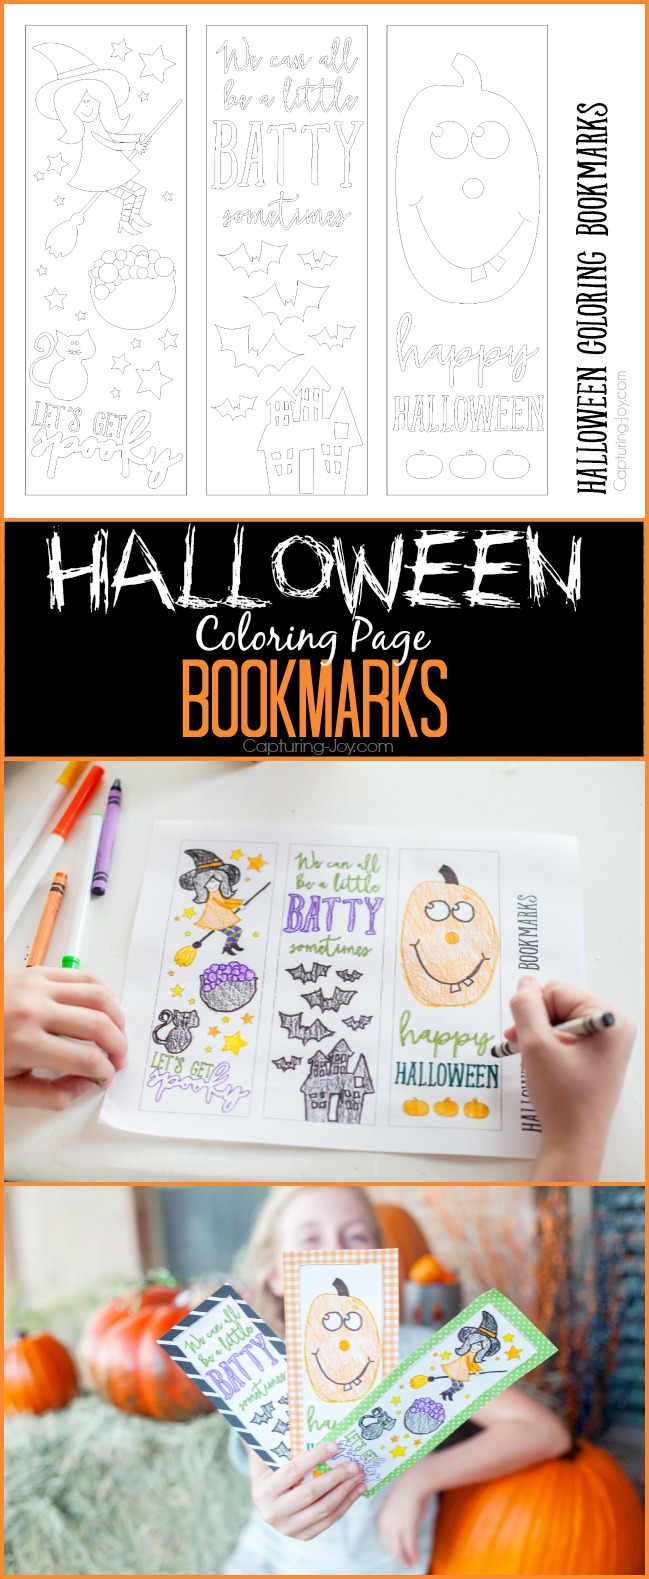 Halloween Coloring Page Free bookmarks